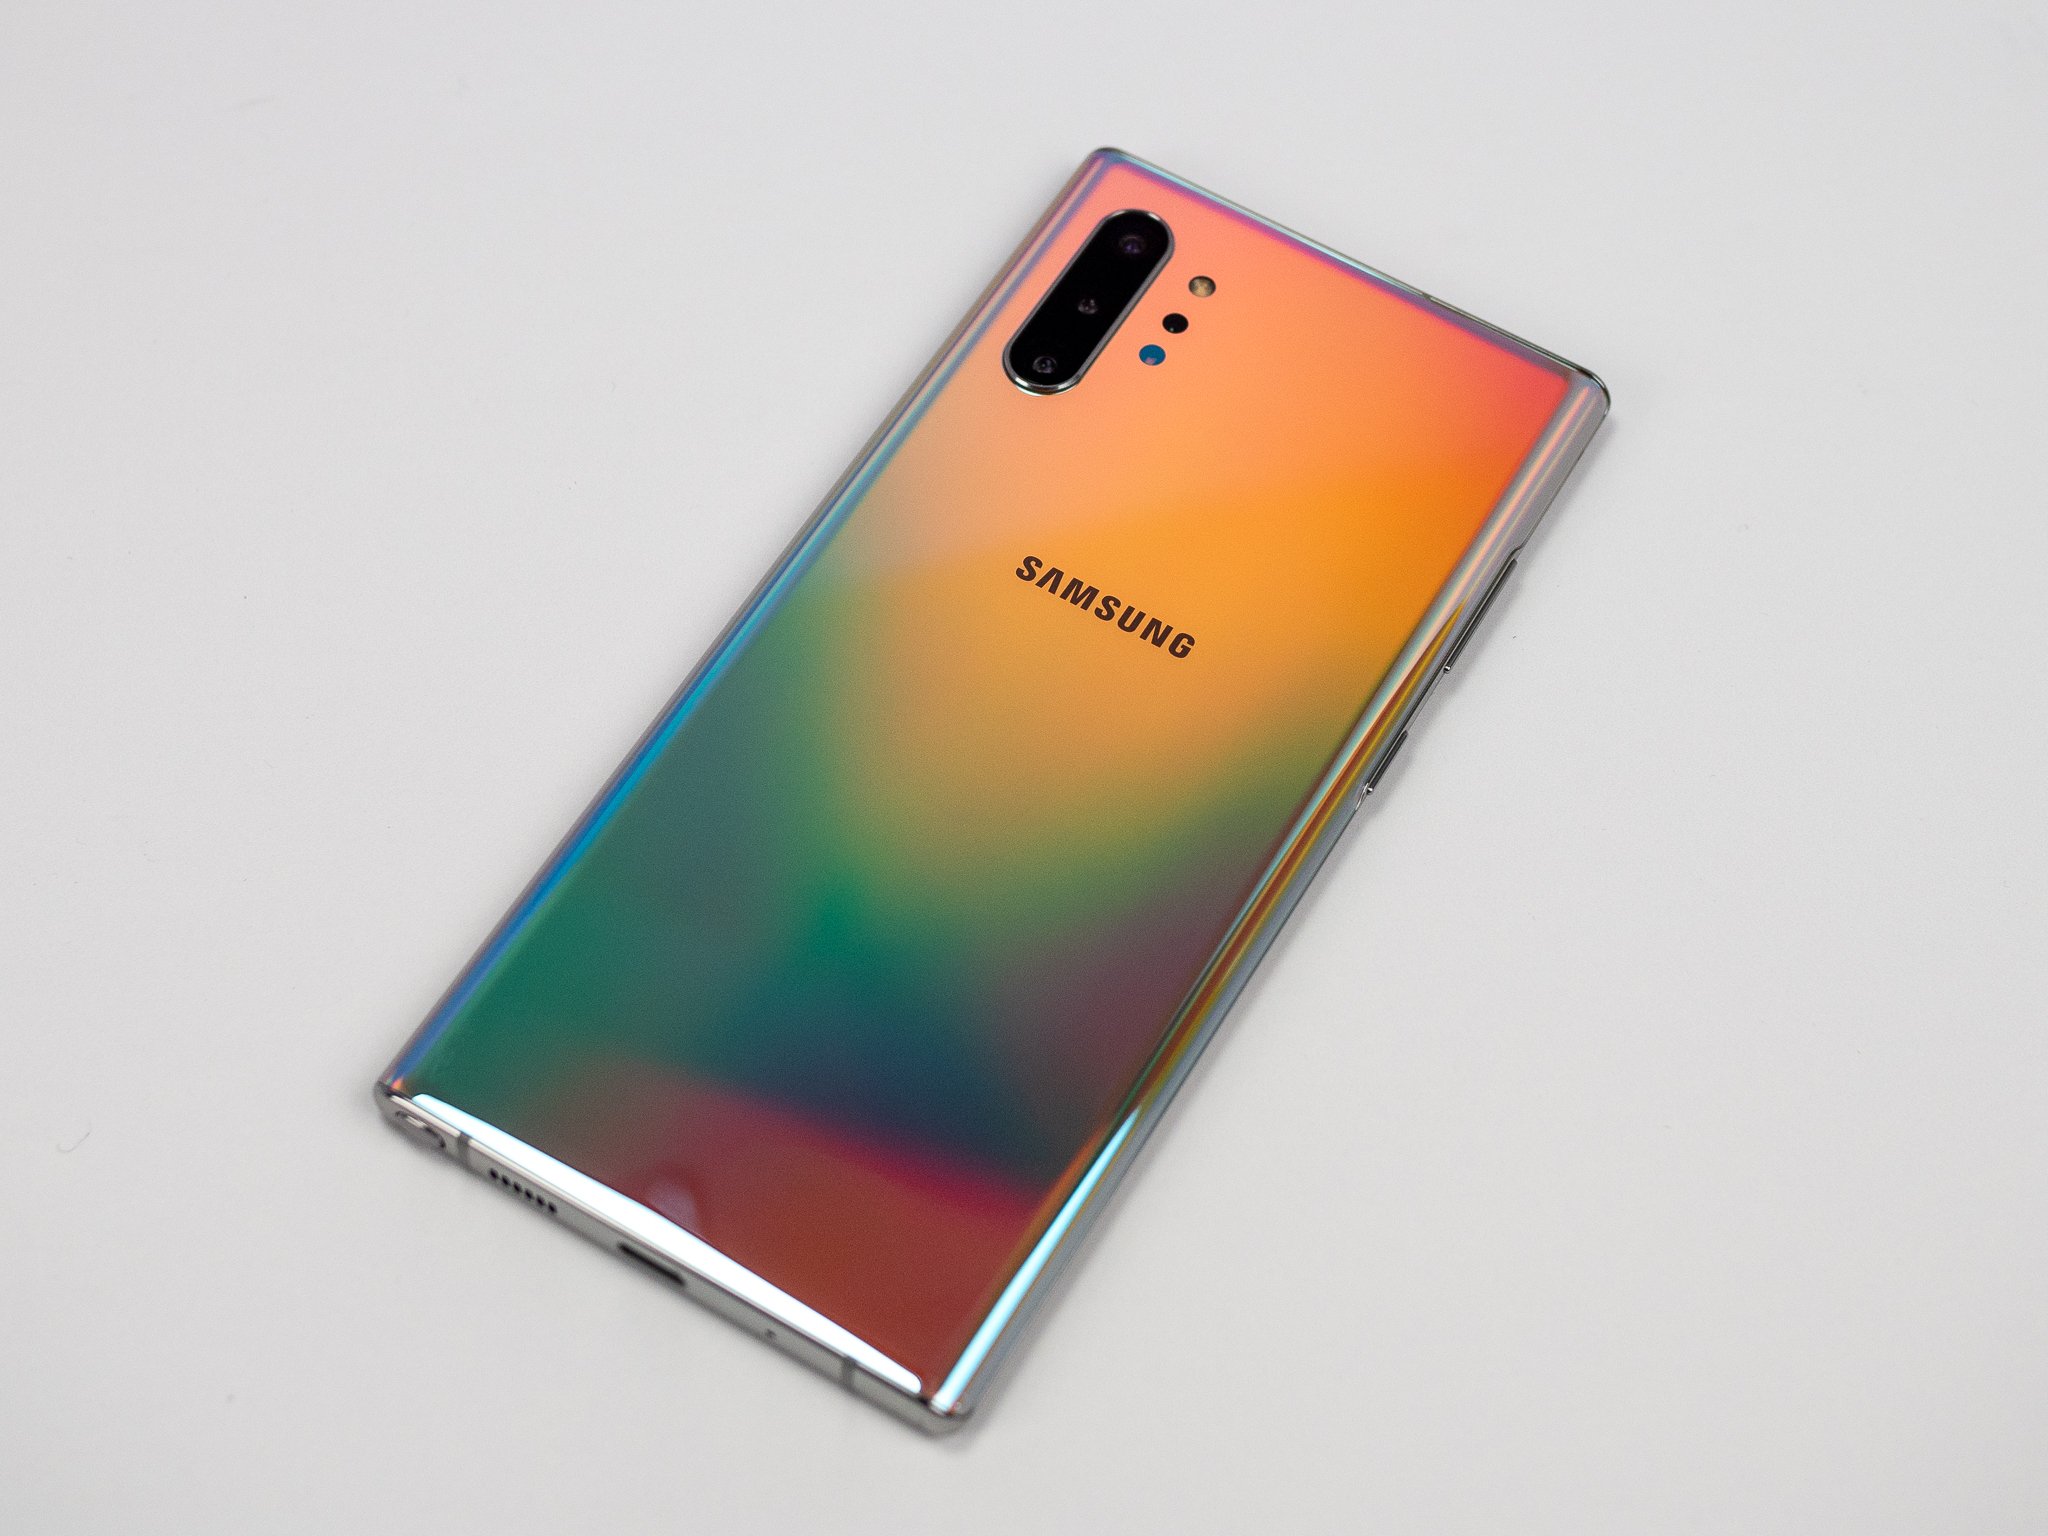 Galaxy Note 10 5g On T Mobile Will Ship With Android 10 Out Of